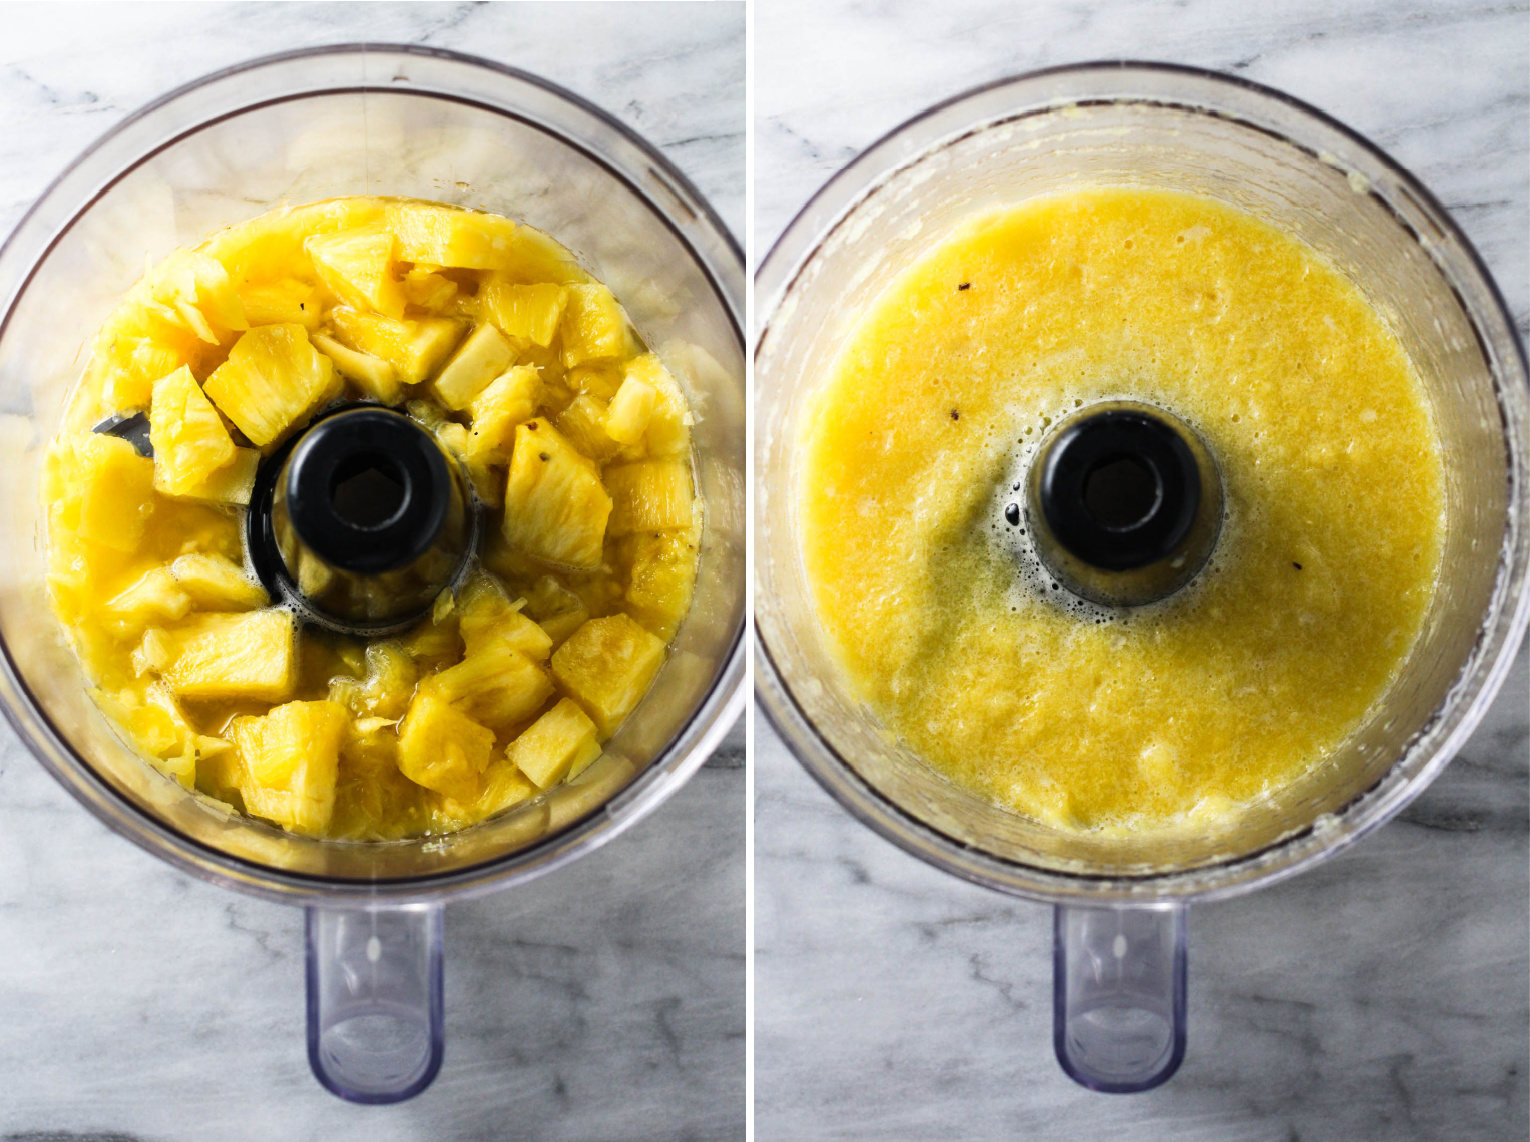 Two side-by-side images. On the left, an image of chopped pineapple inside a blender bowl. On the right, an image of pineapple puree inside a blender bowl.